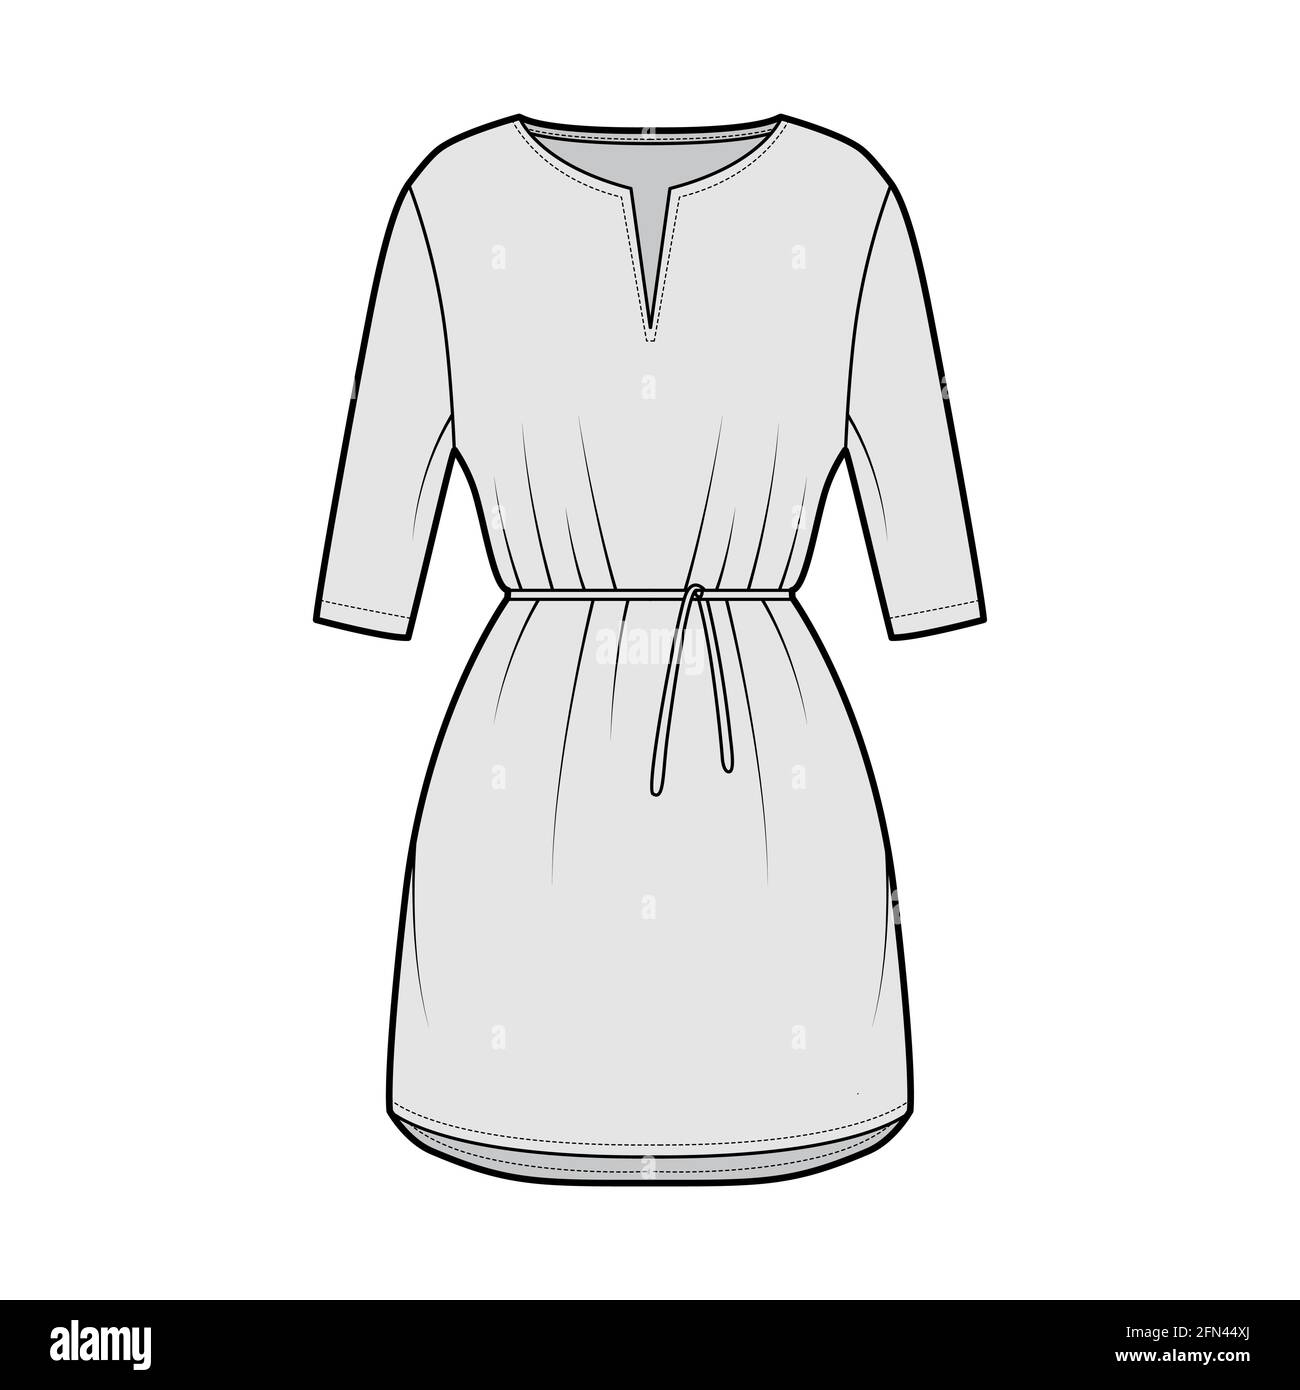 Dress tunic technical fashion illustration with tie, elbow sleeves, oversized body, mini length skirt, slashed neck. Flat apparel front, grey color style. Women, men CAD mockup Stock Vector